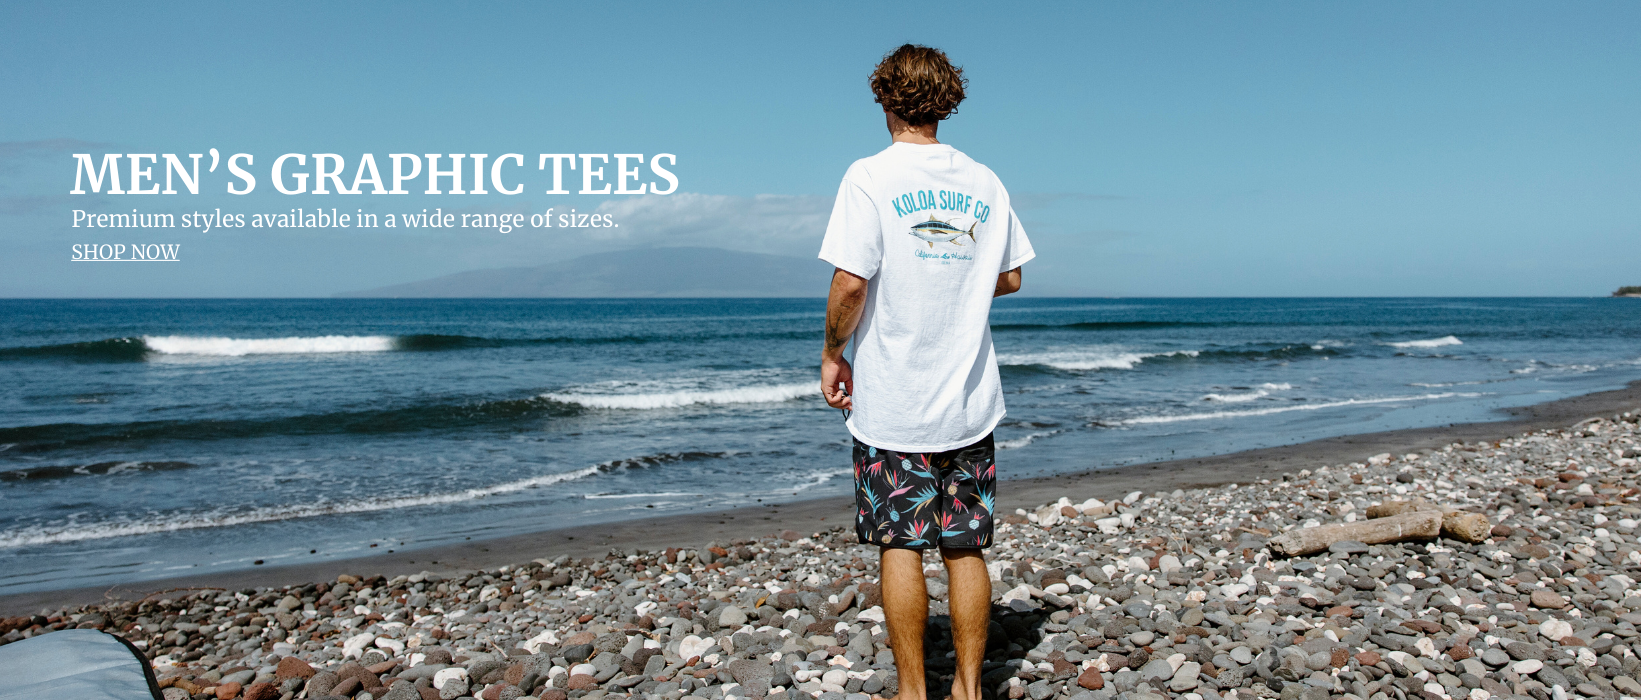 New men's spring graphic tees! Shop from a wide variety of graphic t-shirt styles and sizes!